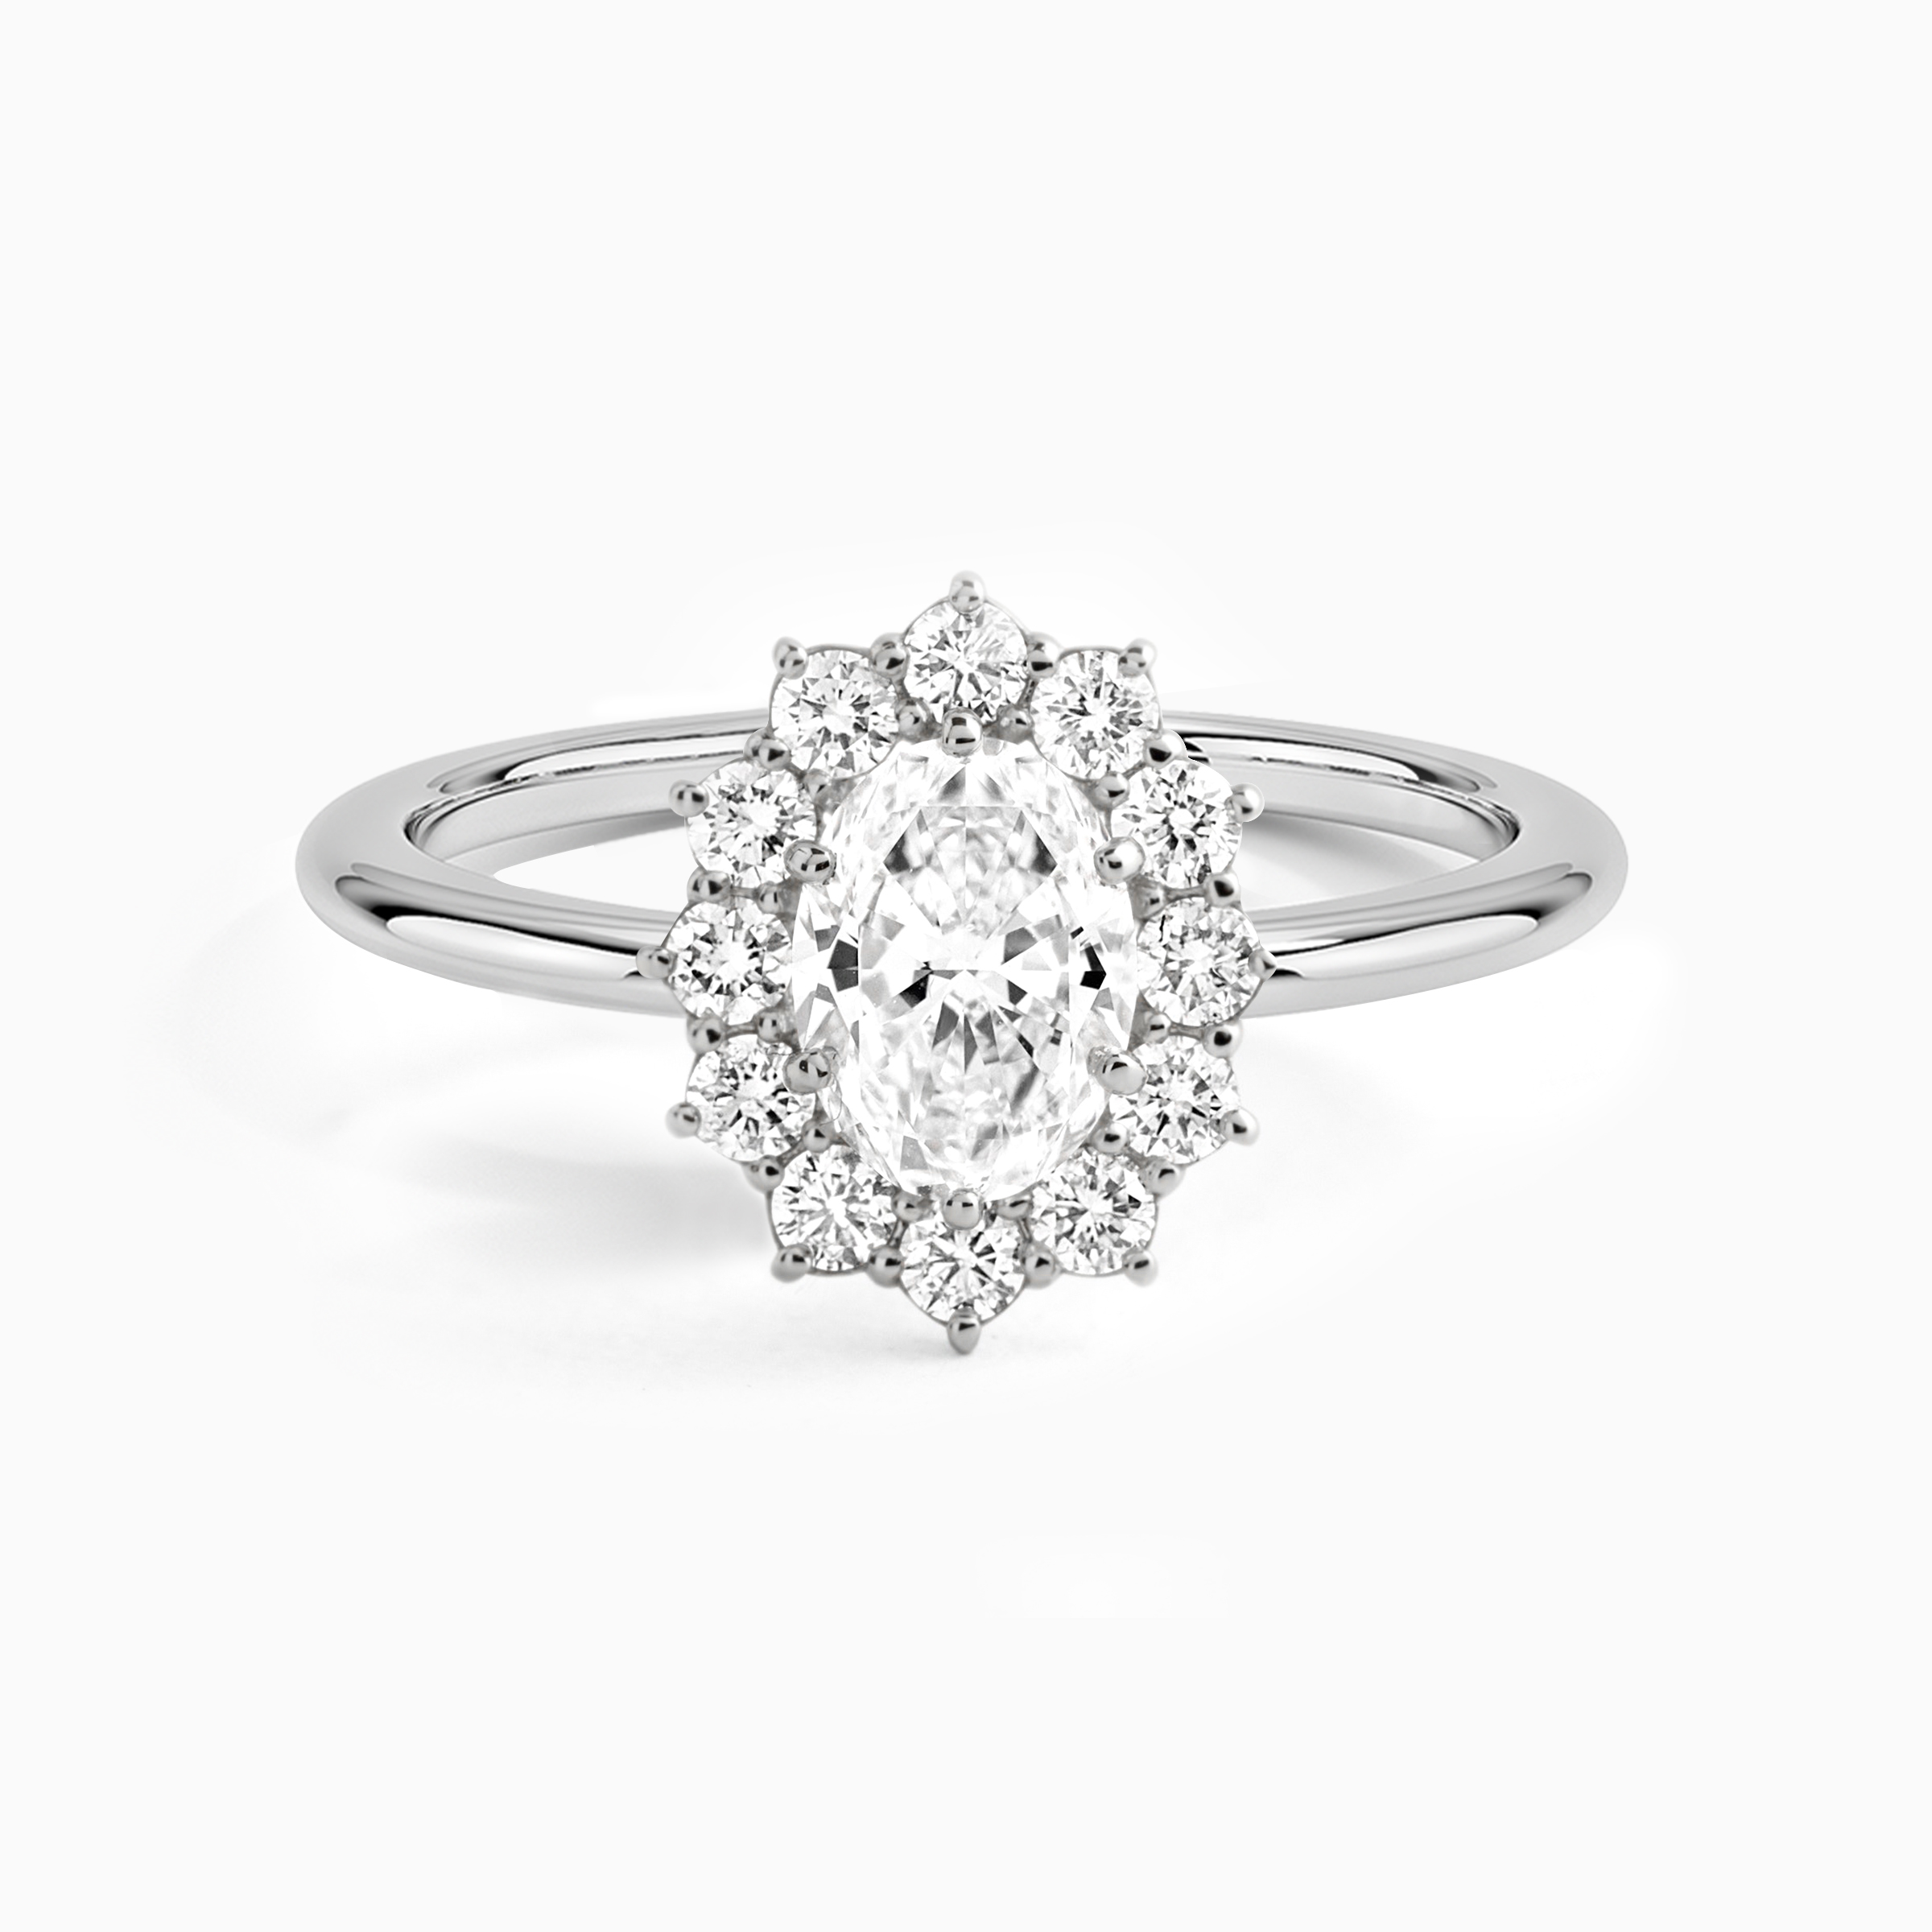 Darry Ring oval cut halo promise ring in white gold